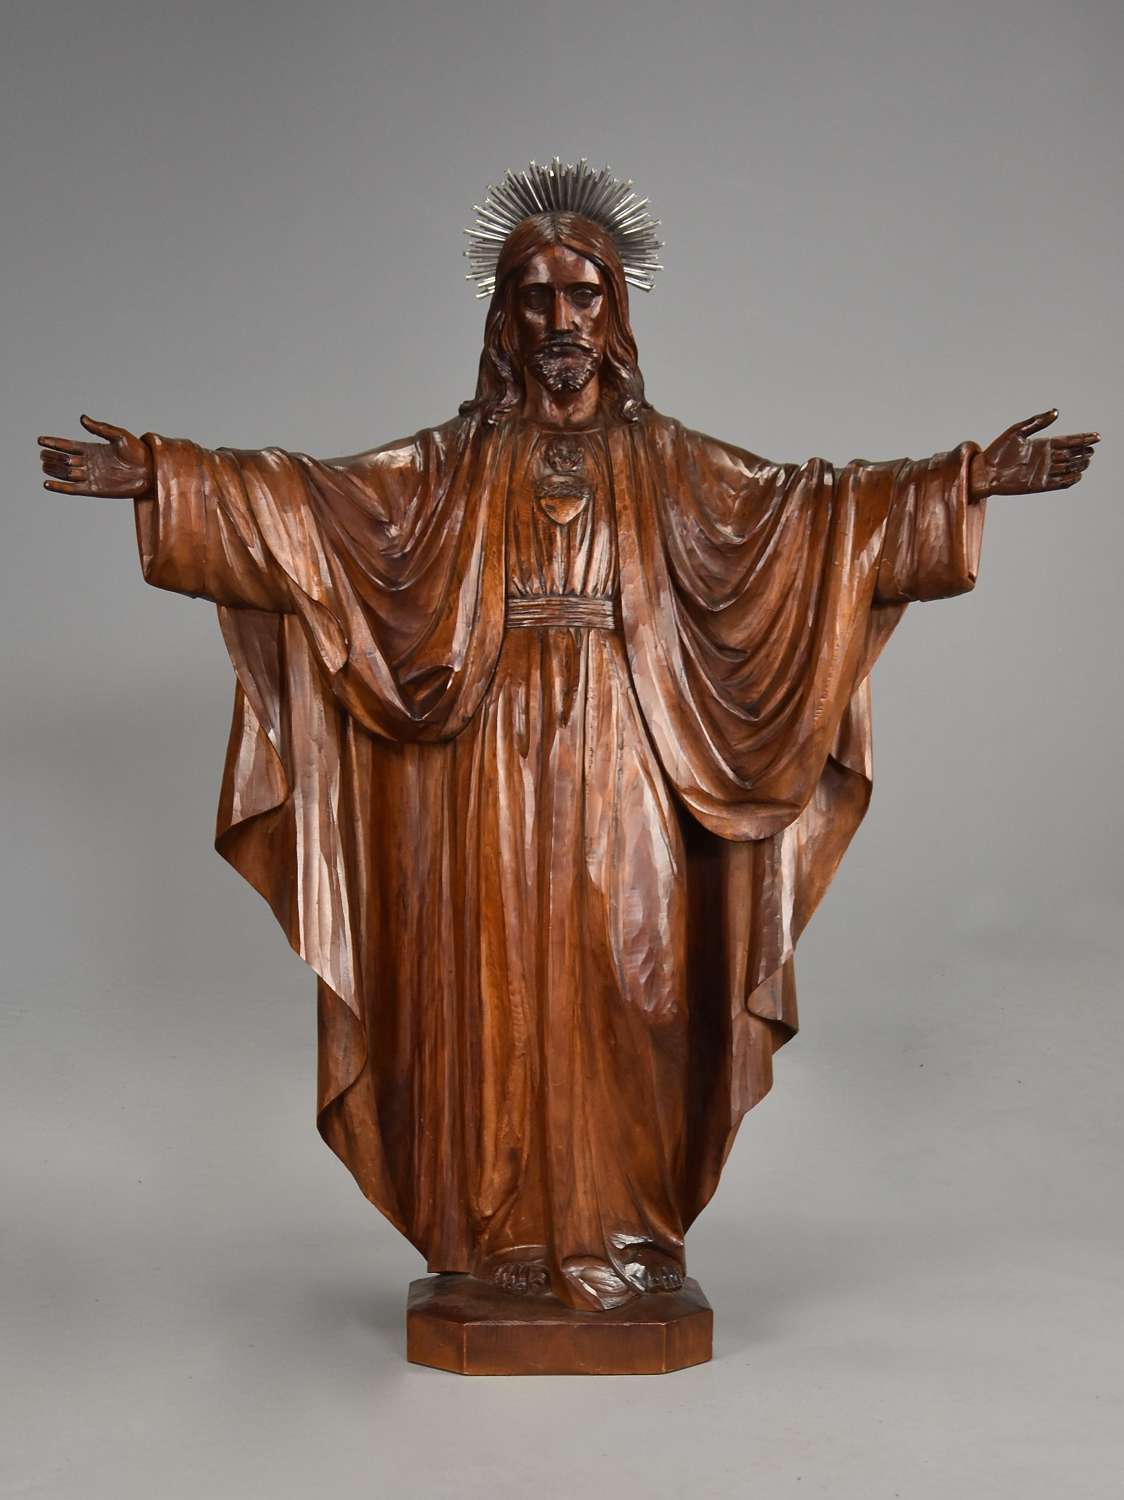 Large finely carved limewood figure of Christ the Redeemer